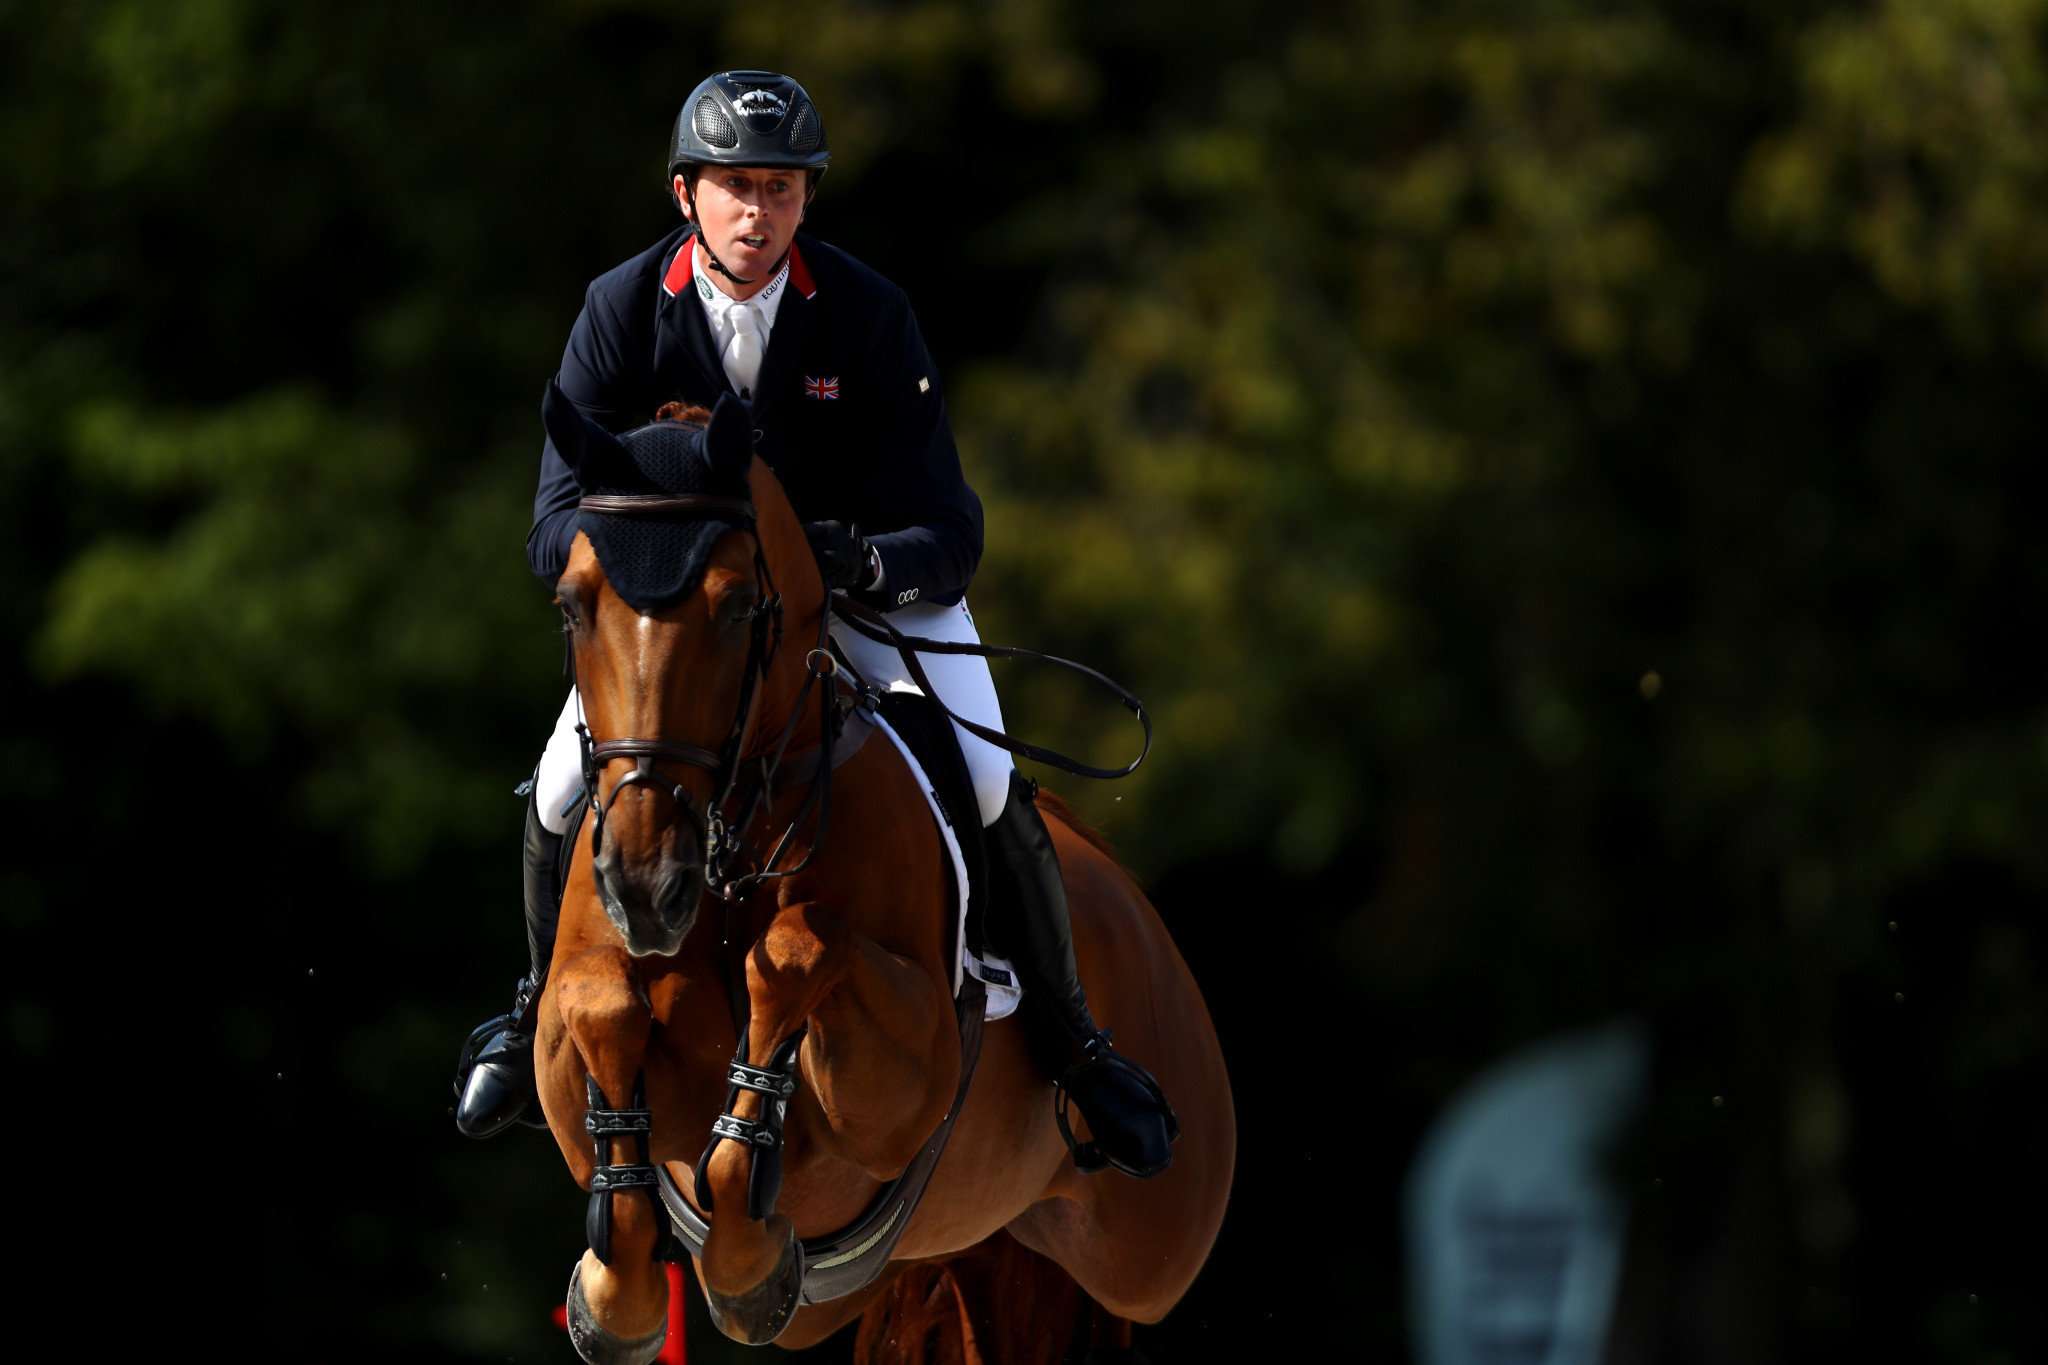 Britain's Ben Maher is in a strong position to take the Global Champions Tour title ©Getty Images